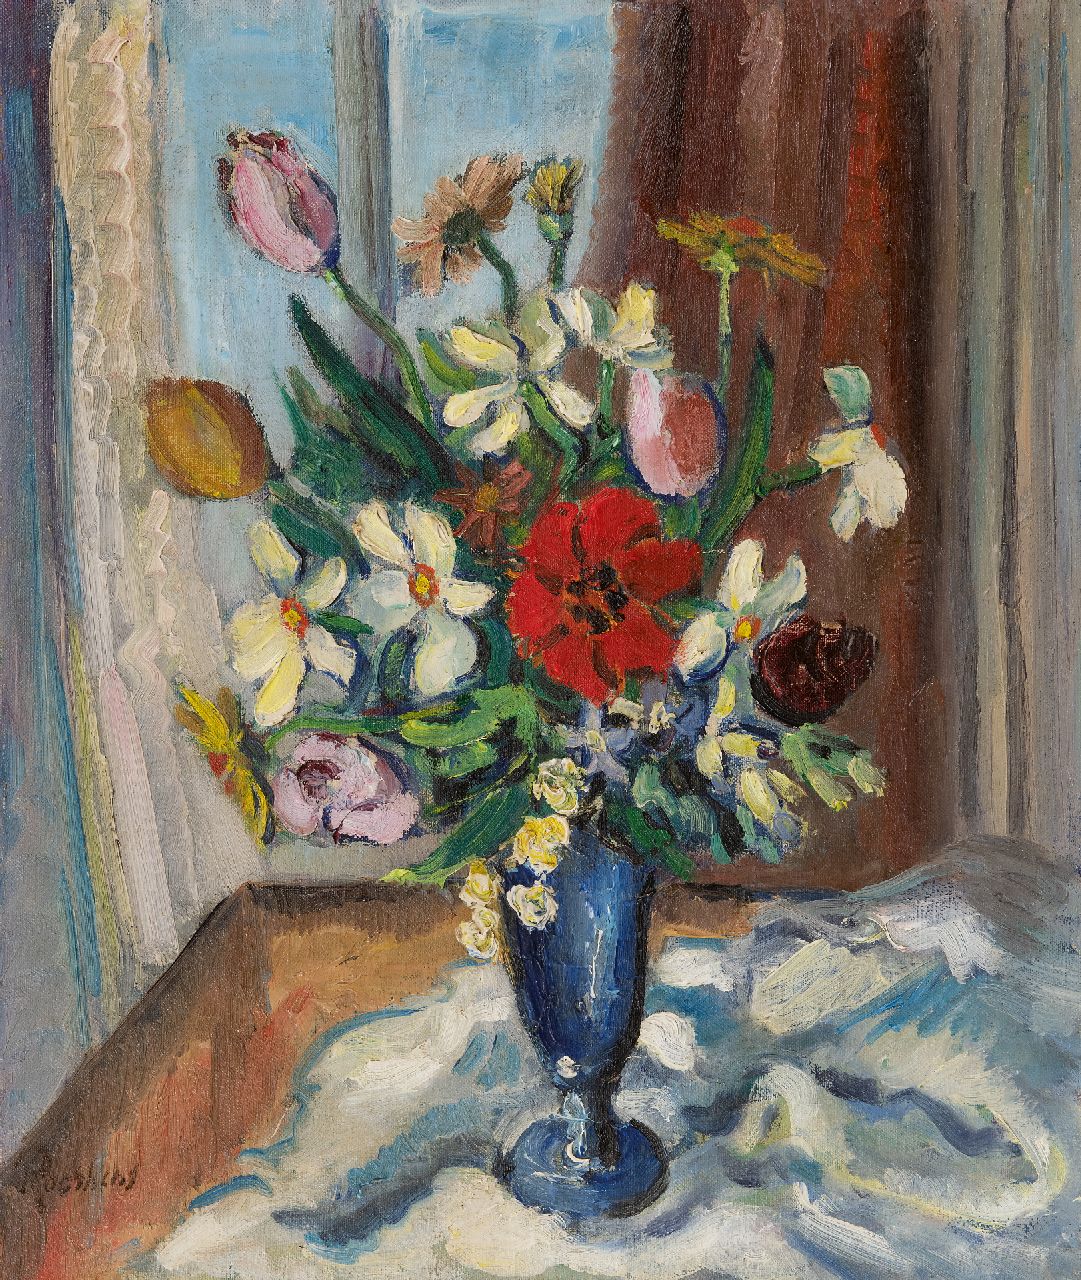 Rooskens J.A.  | Joseph Antoon 'Anton' Rooskens | Paintings offered for sale | Flower still life, oil on canvas 60.0 x 50.6 cm, signed l.l.